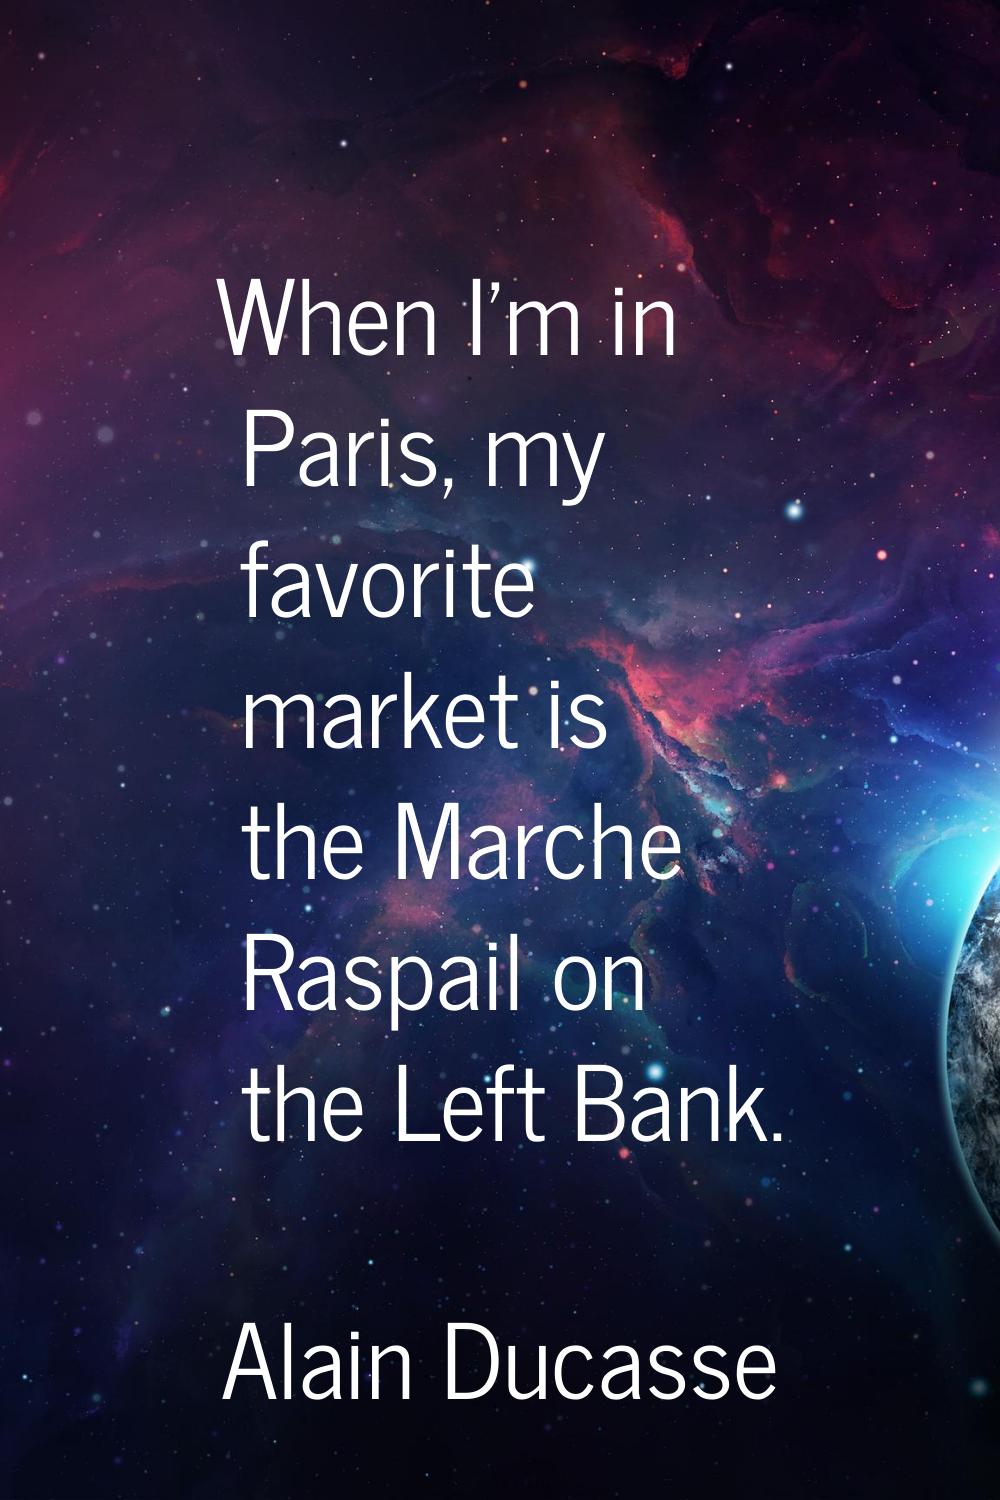 When I'm in Paris, my favorite market is the Marche Raspail on the Left Bank.